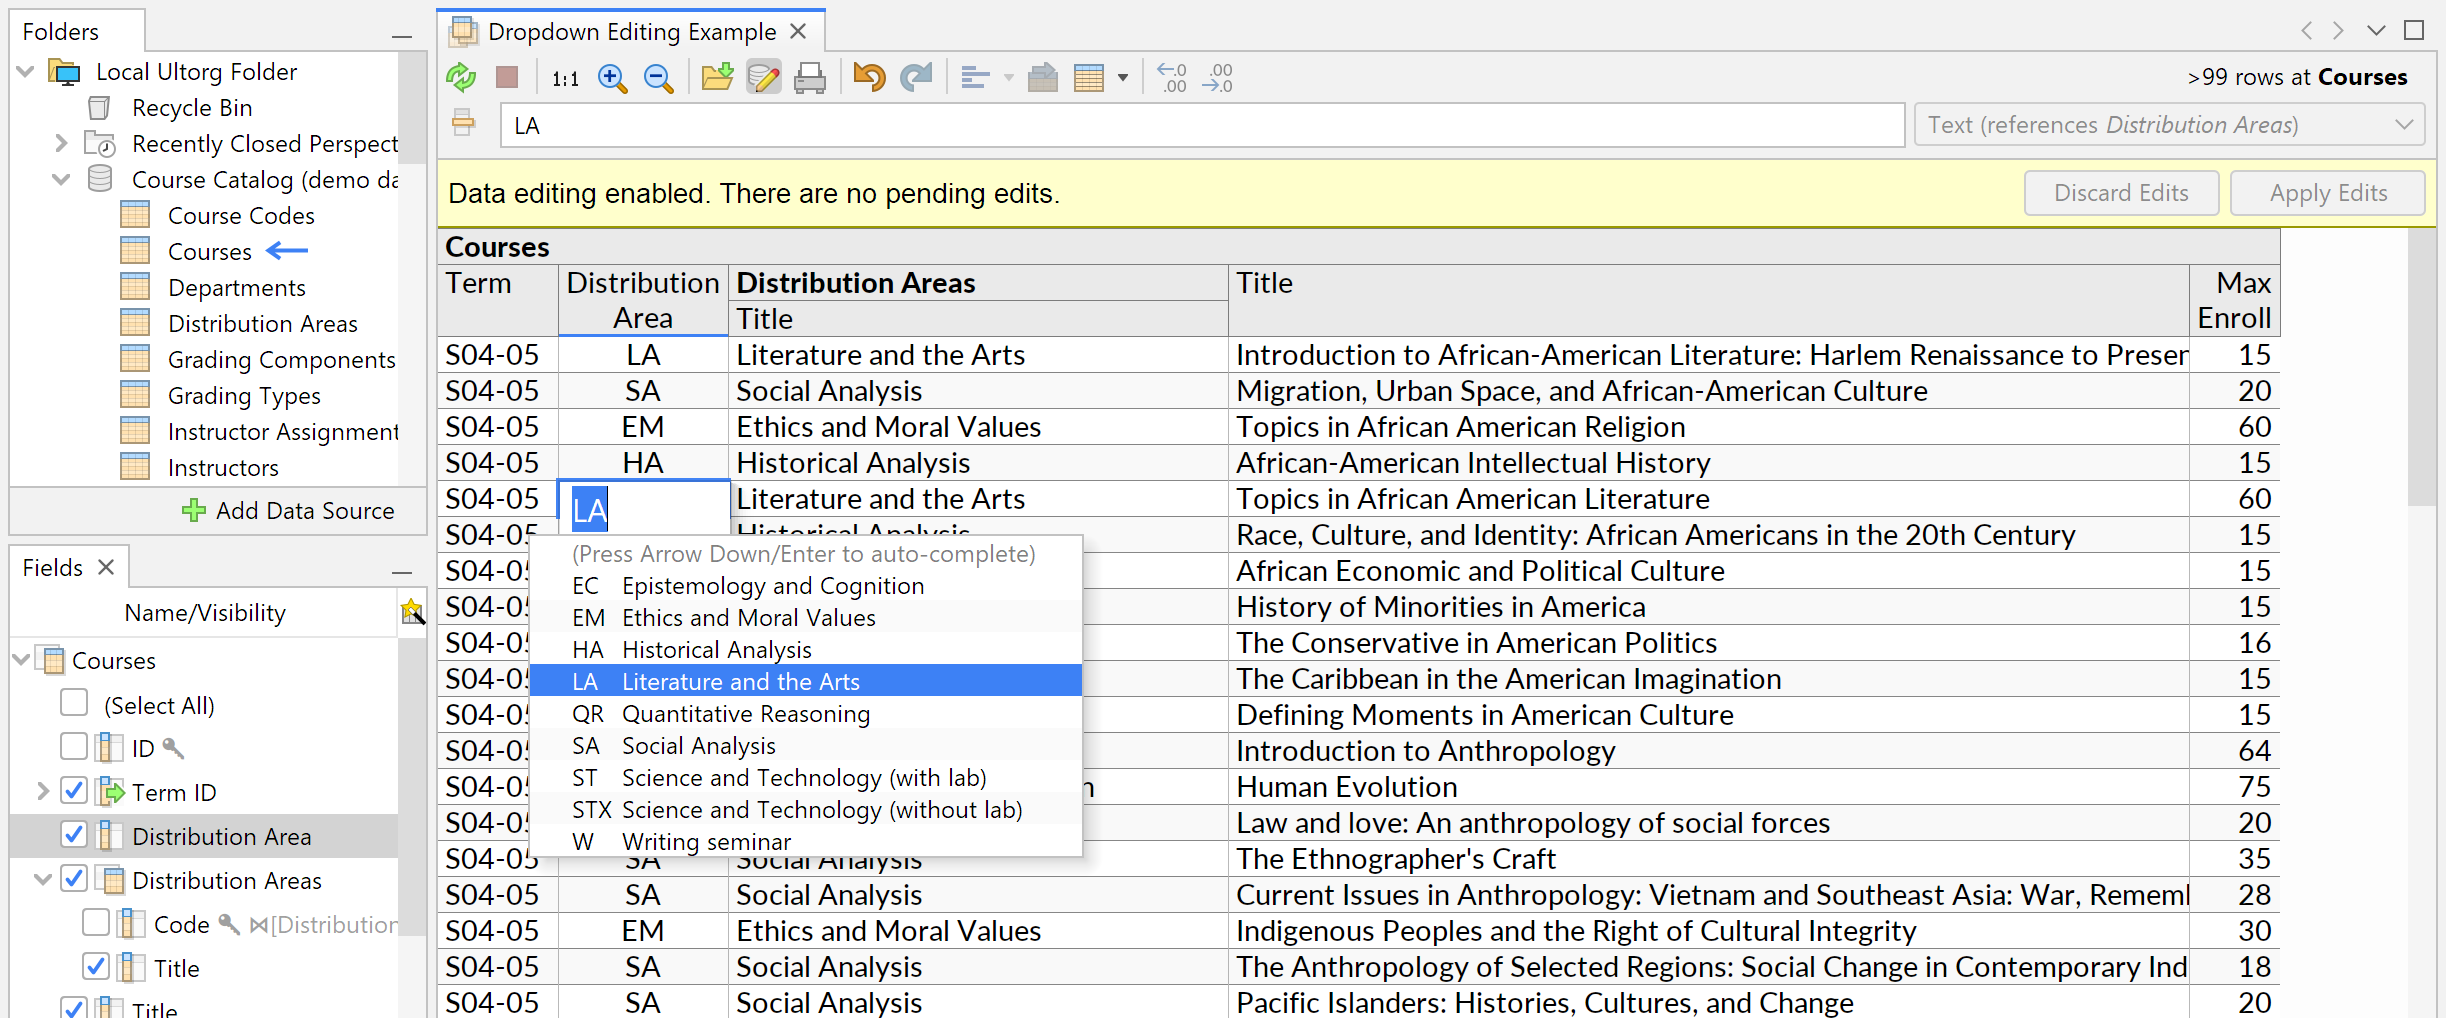 Screenshot showing the dropdown auto-complete feature when editing a foreign key value.